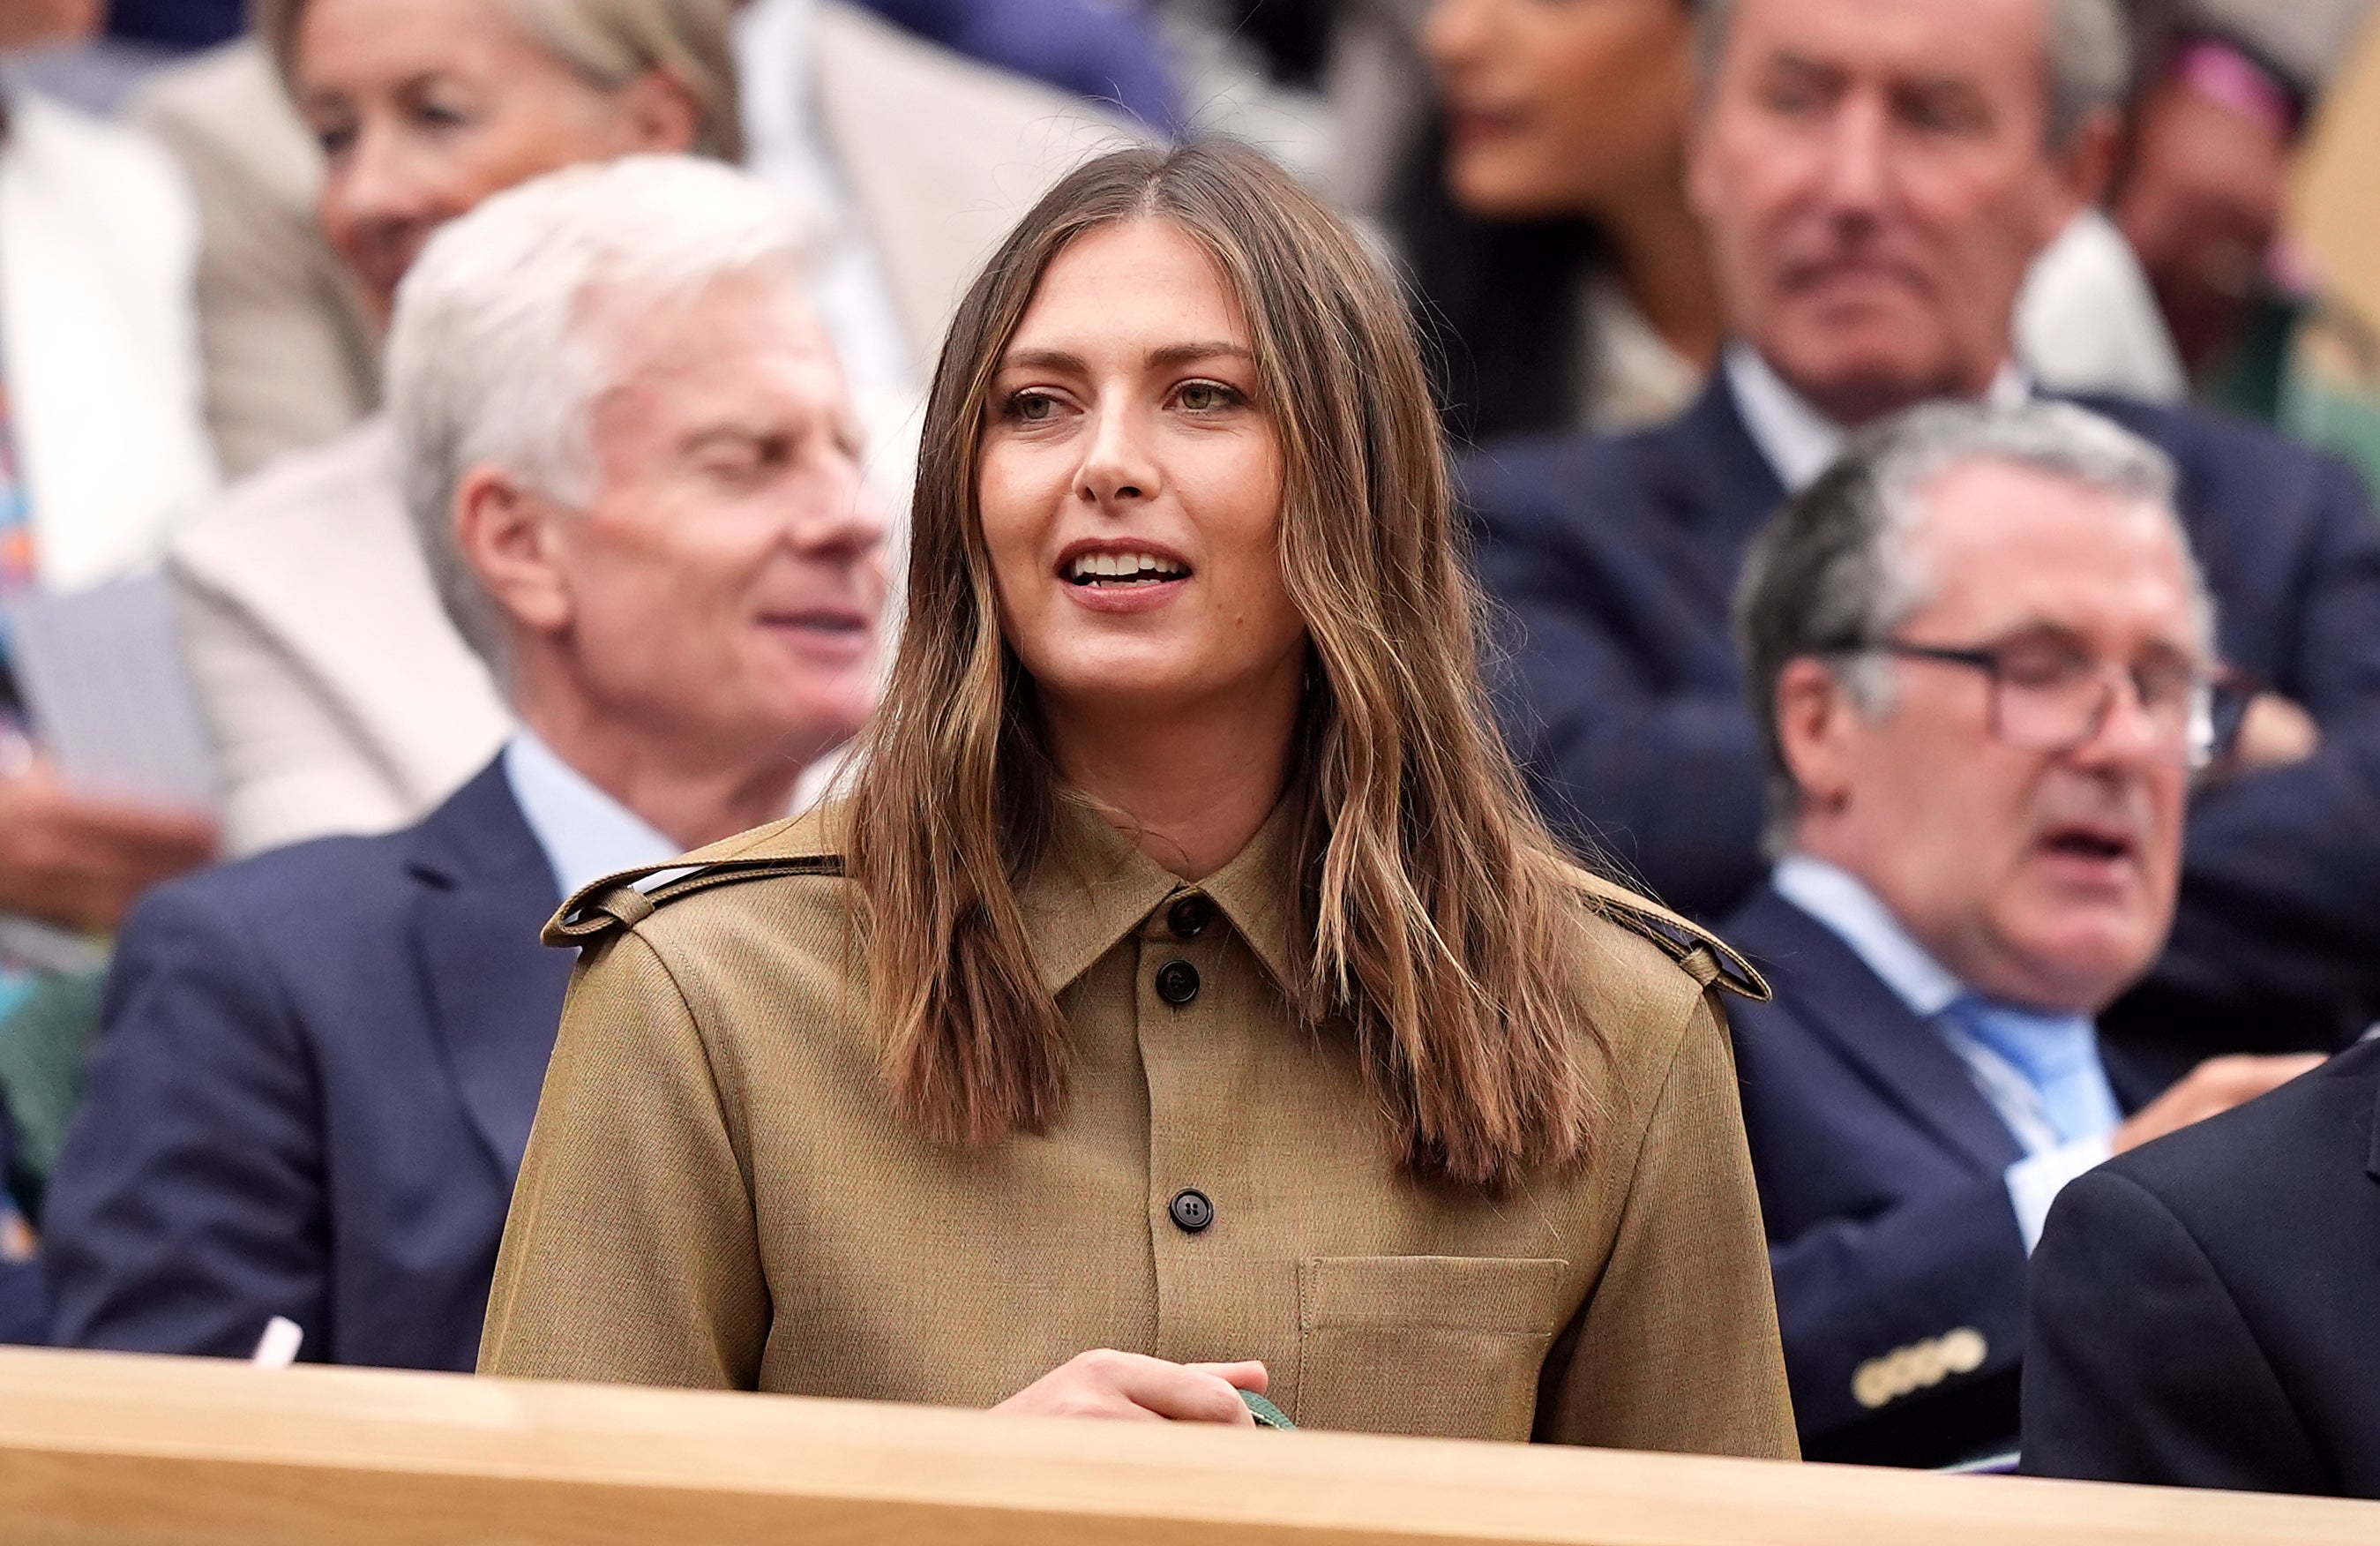 Twenty years on from winning the women’s singles title aged 17, Maria Sharapova watched the Centre Court action from the royal box (Jordan Pettitt/PA)